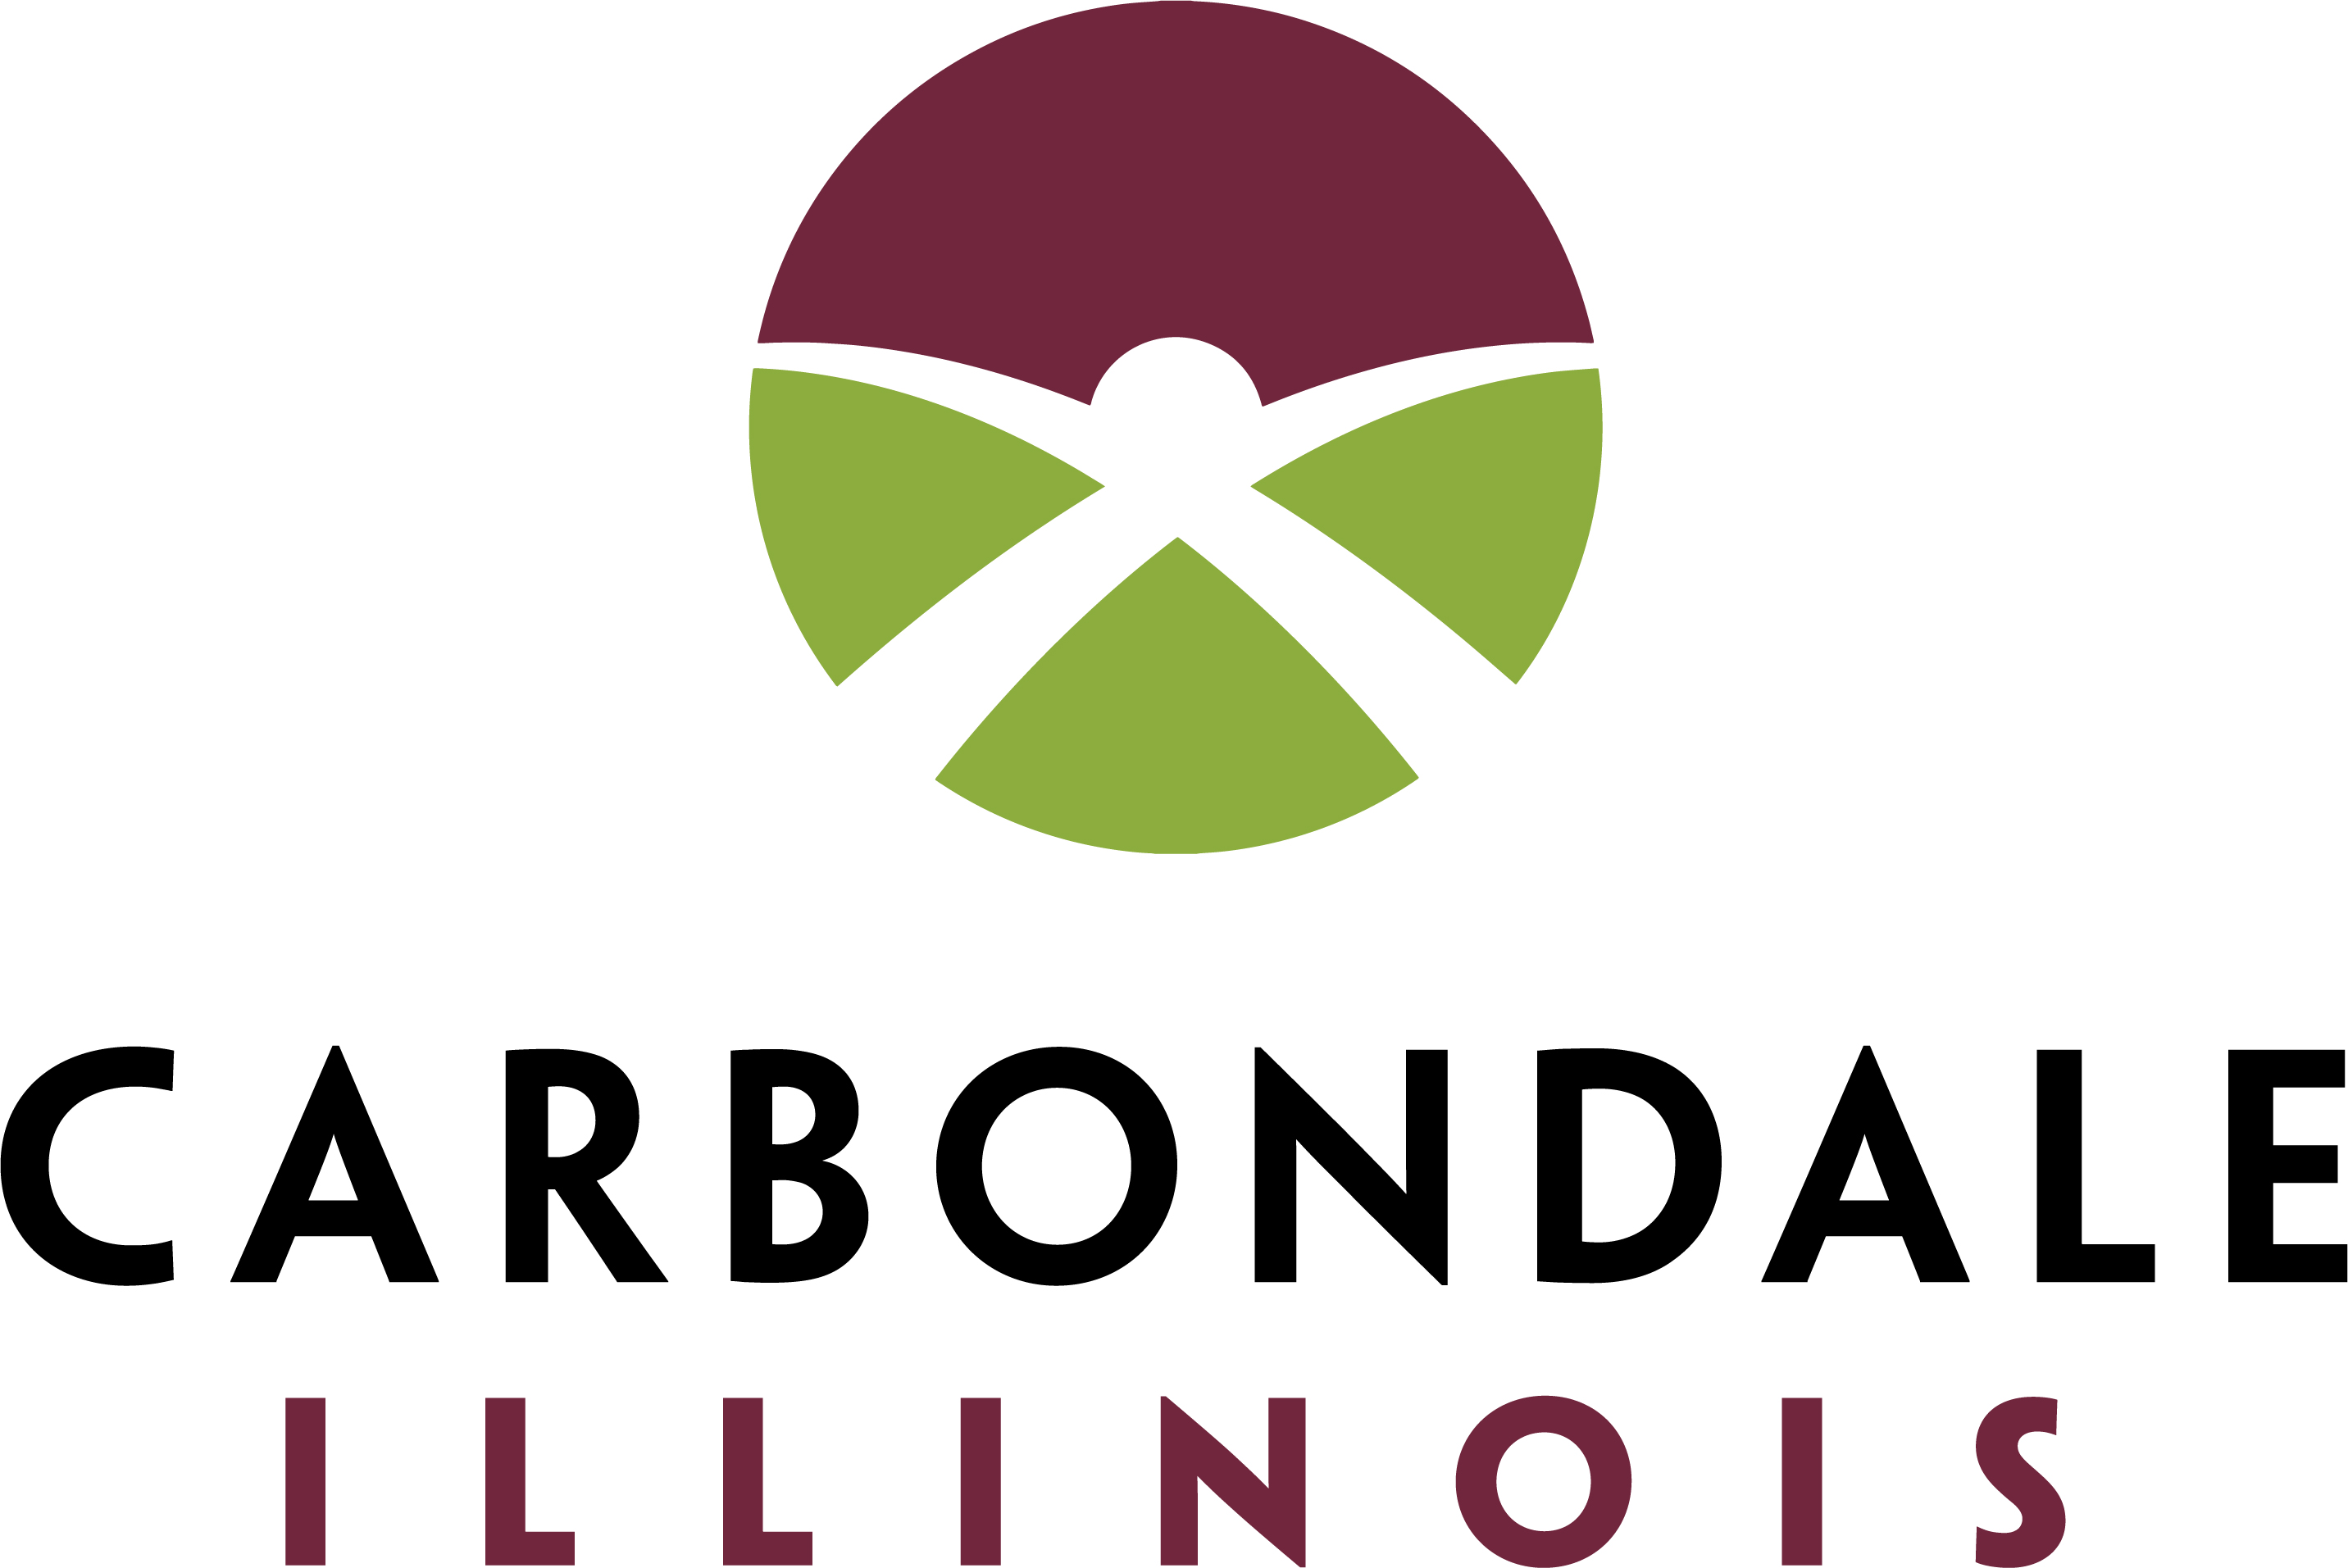 City of Carbondale